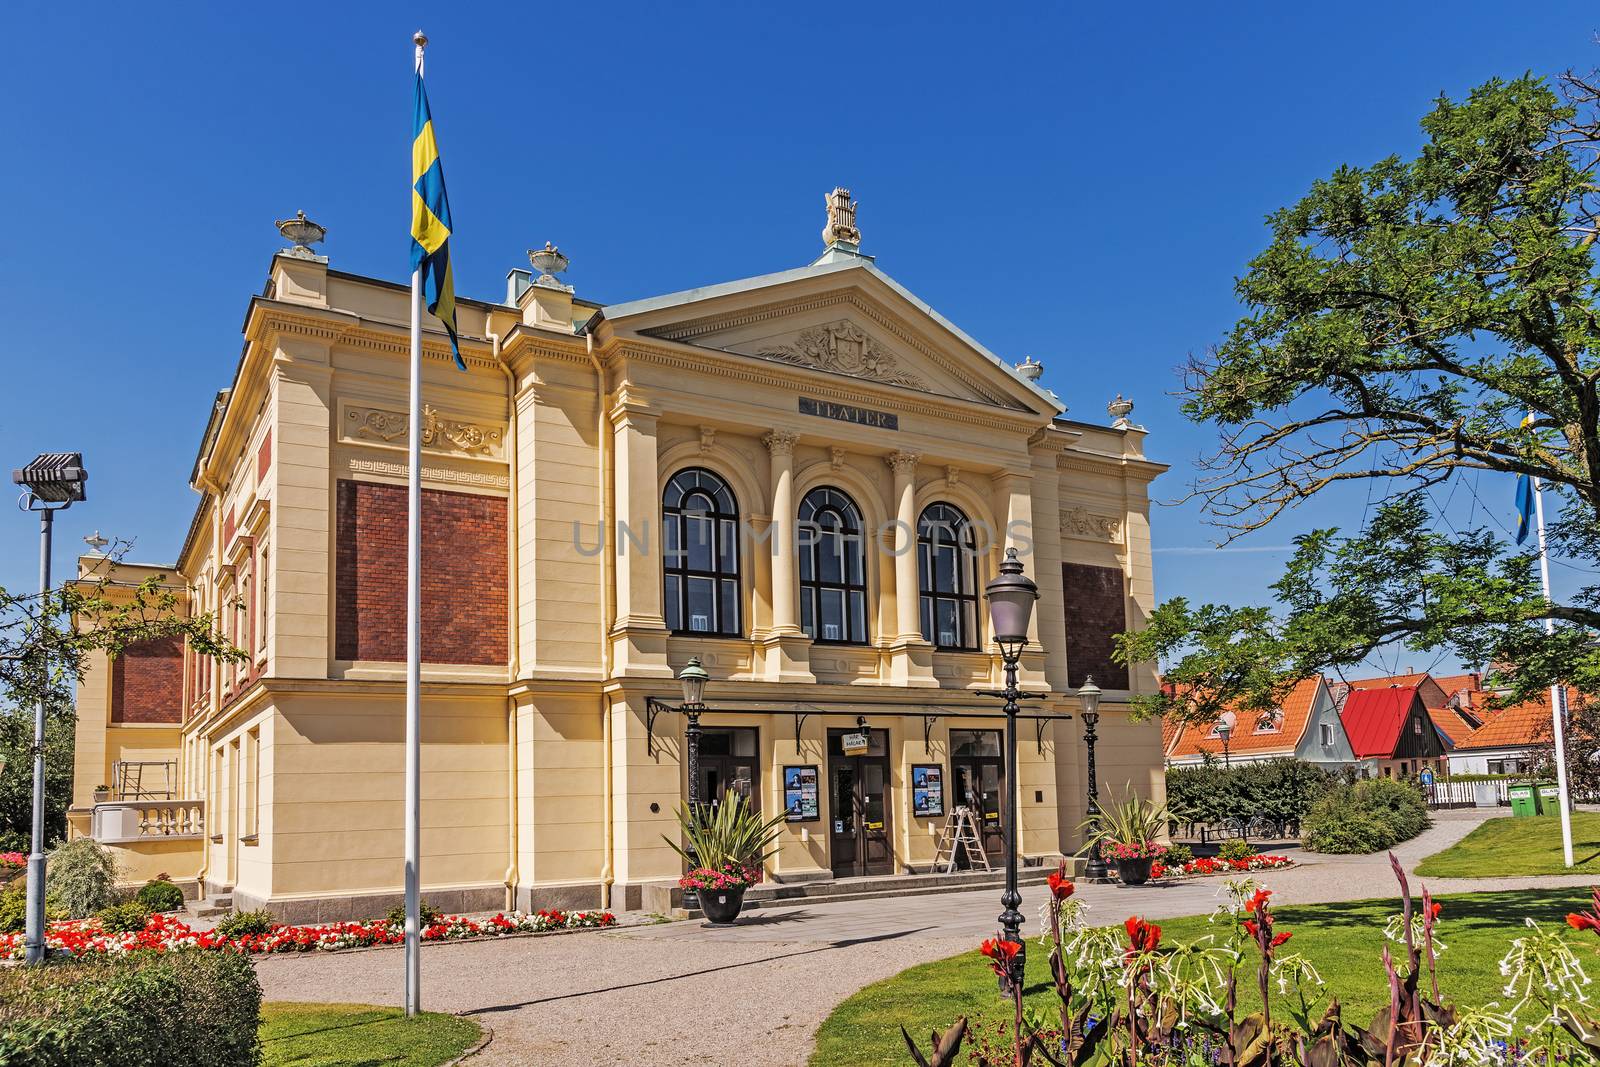 Ystad Theater, beautiful edifice built in 1894 in neoclassical architectural style, designed by  Ystad’s first city architect Peter Boisen.